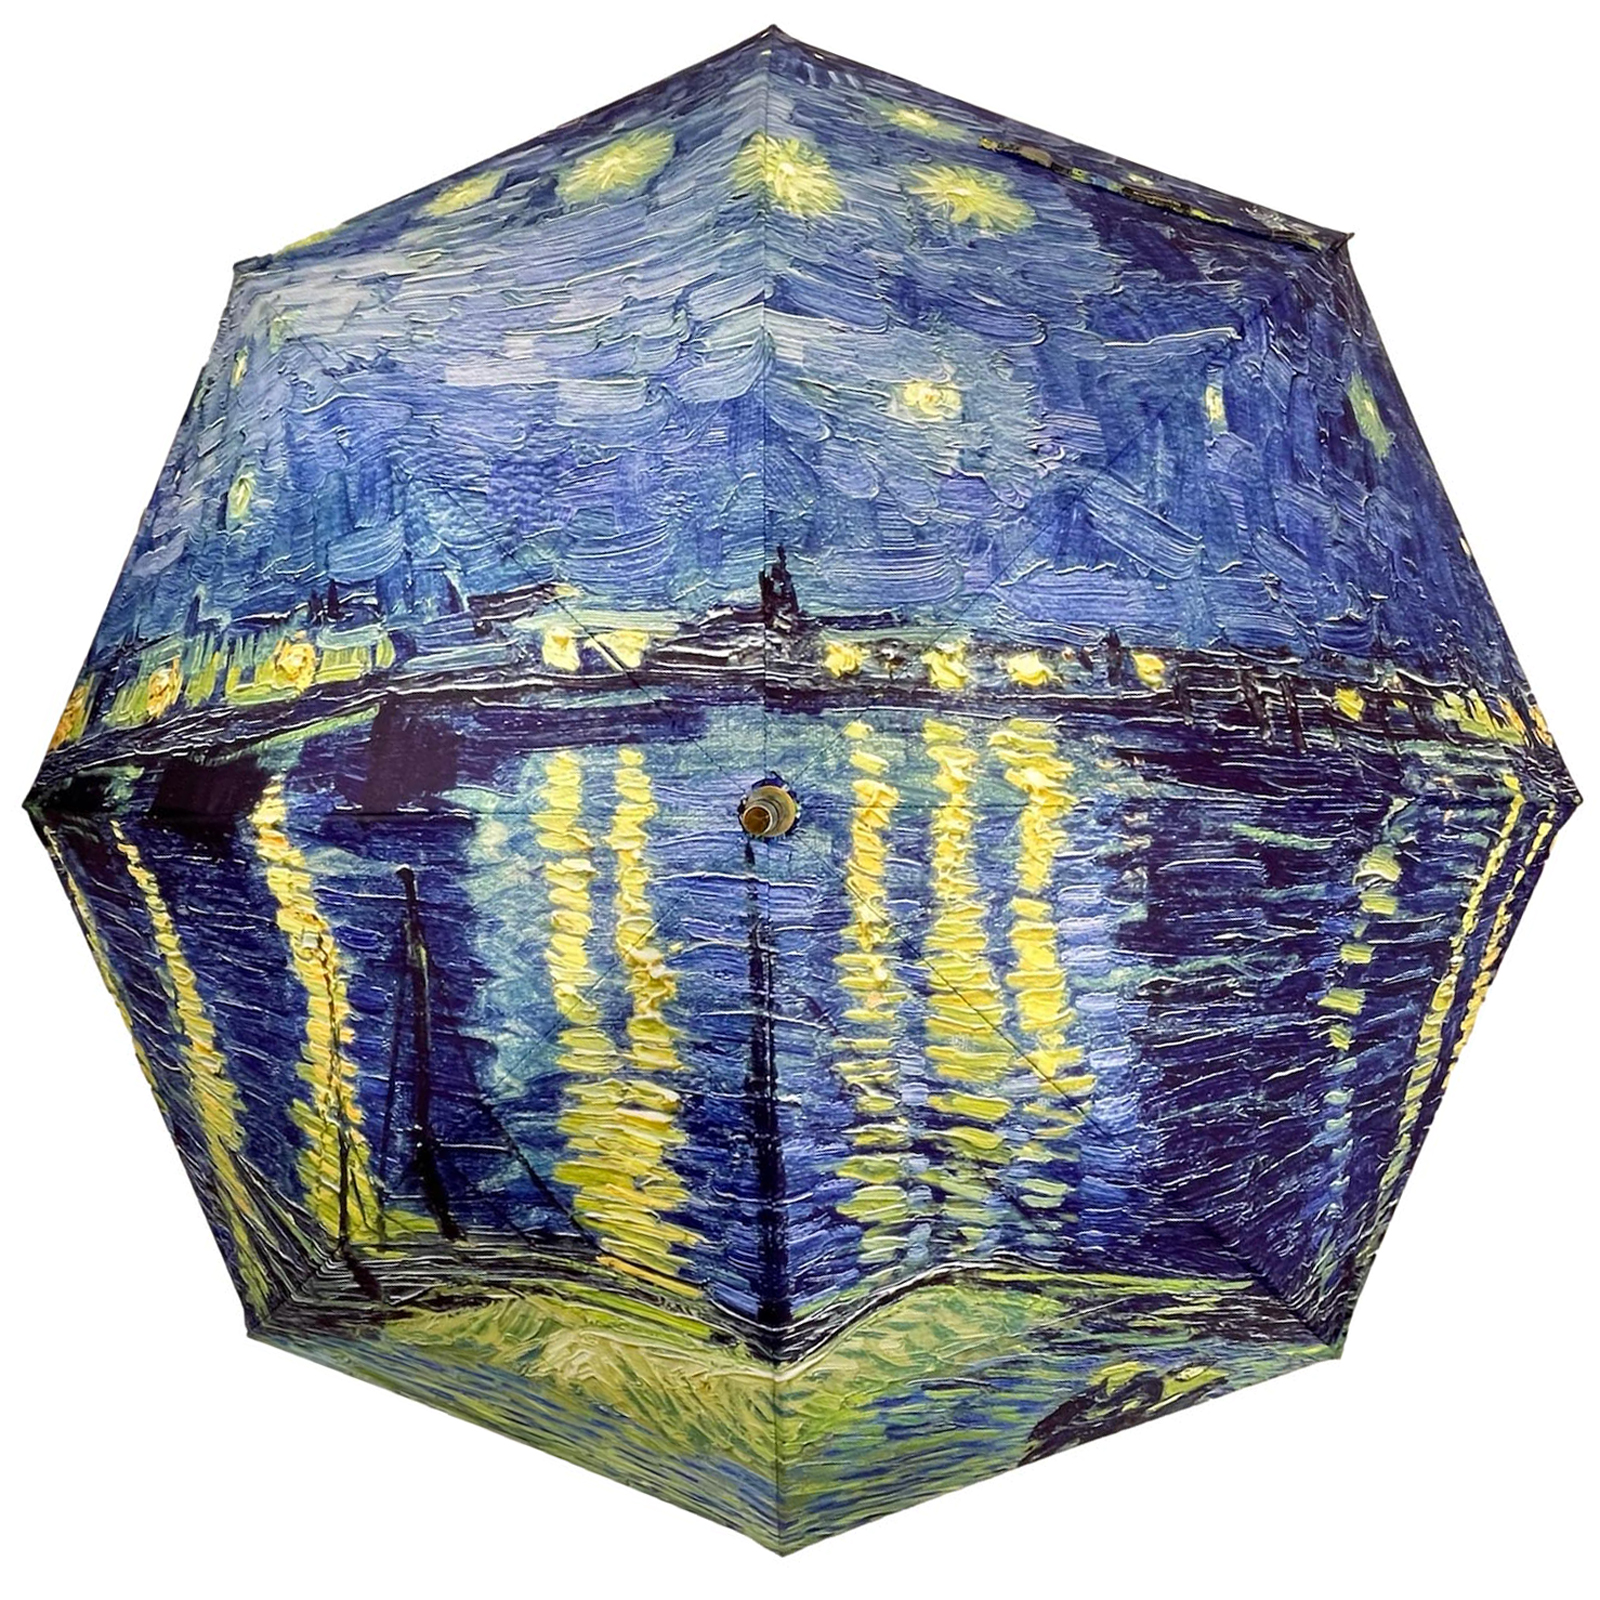 Stormking Classic Walking Length Umbrella - Art Collection - Over the Rhone by Van Gogh